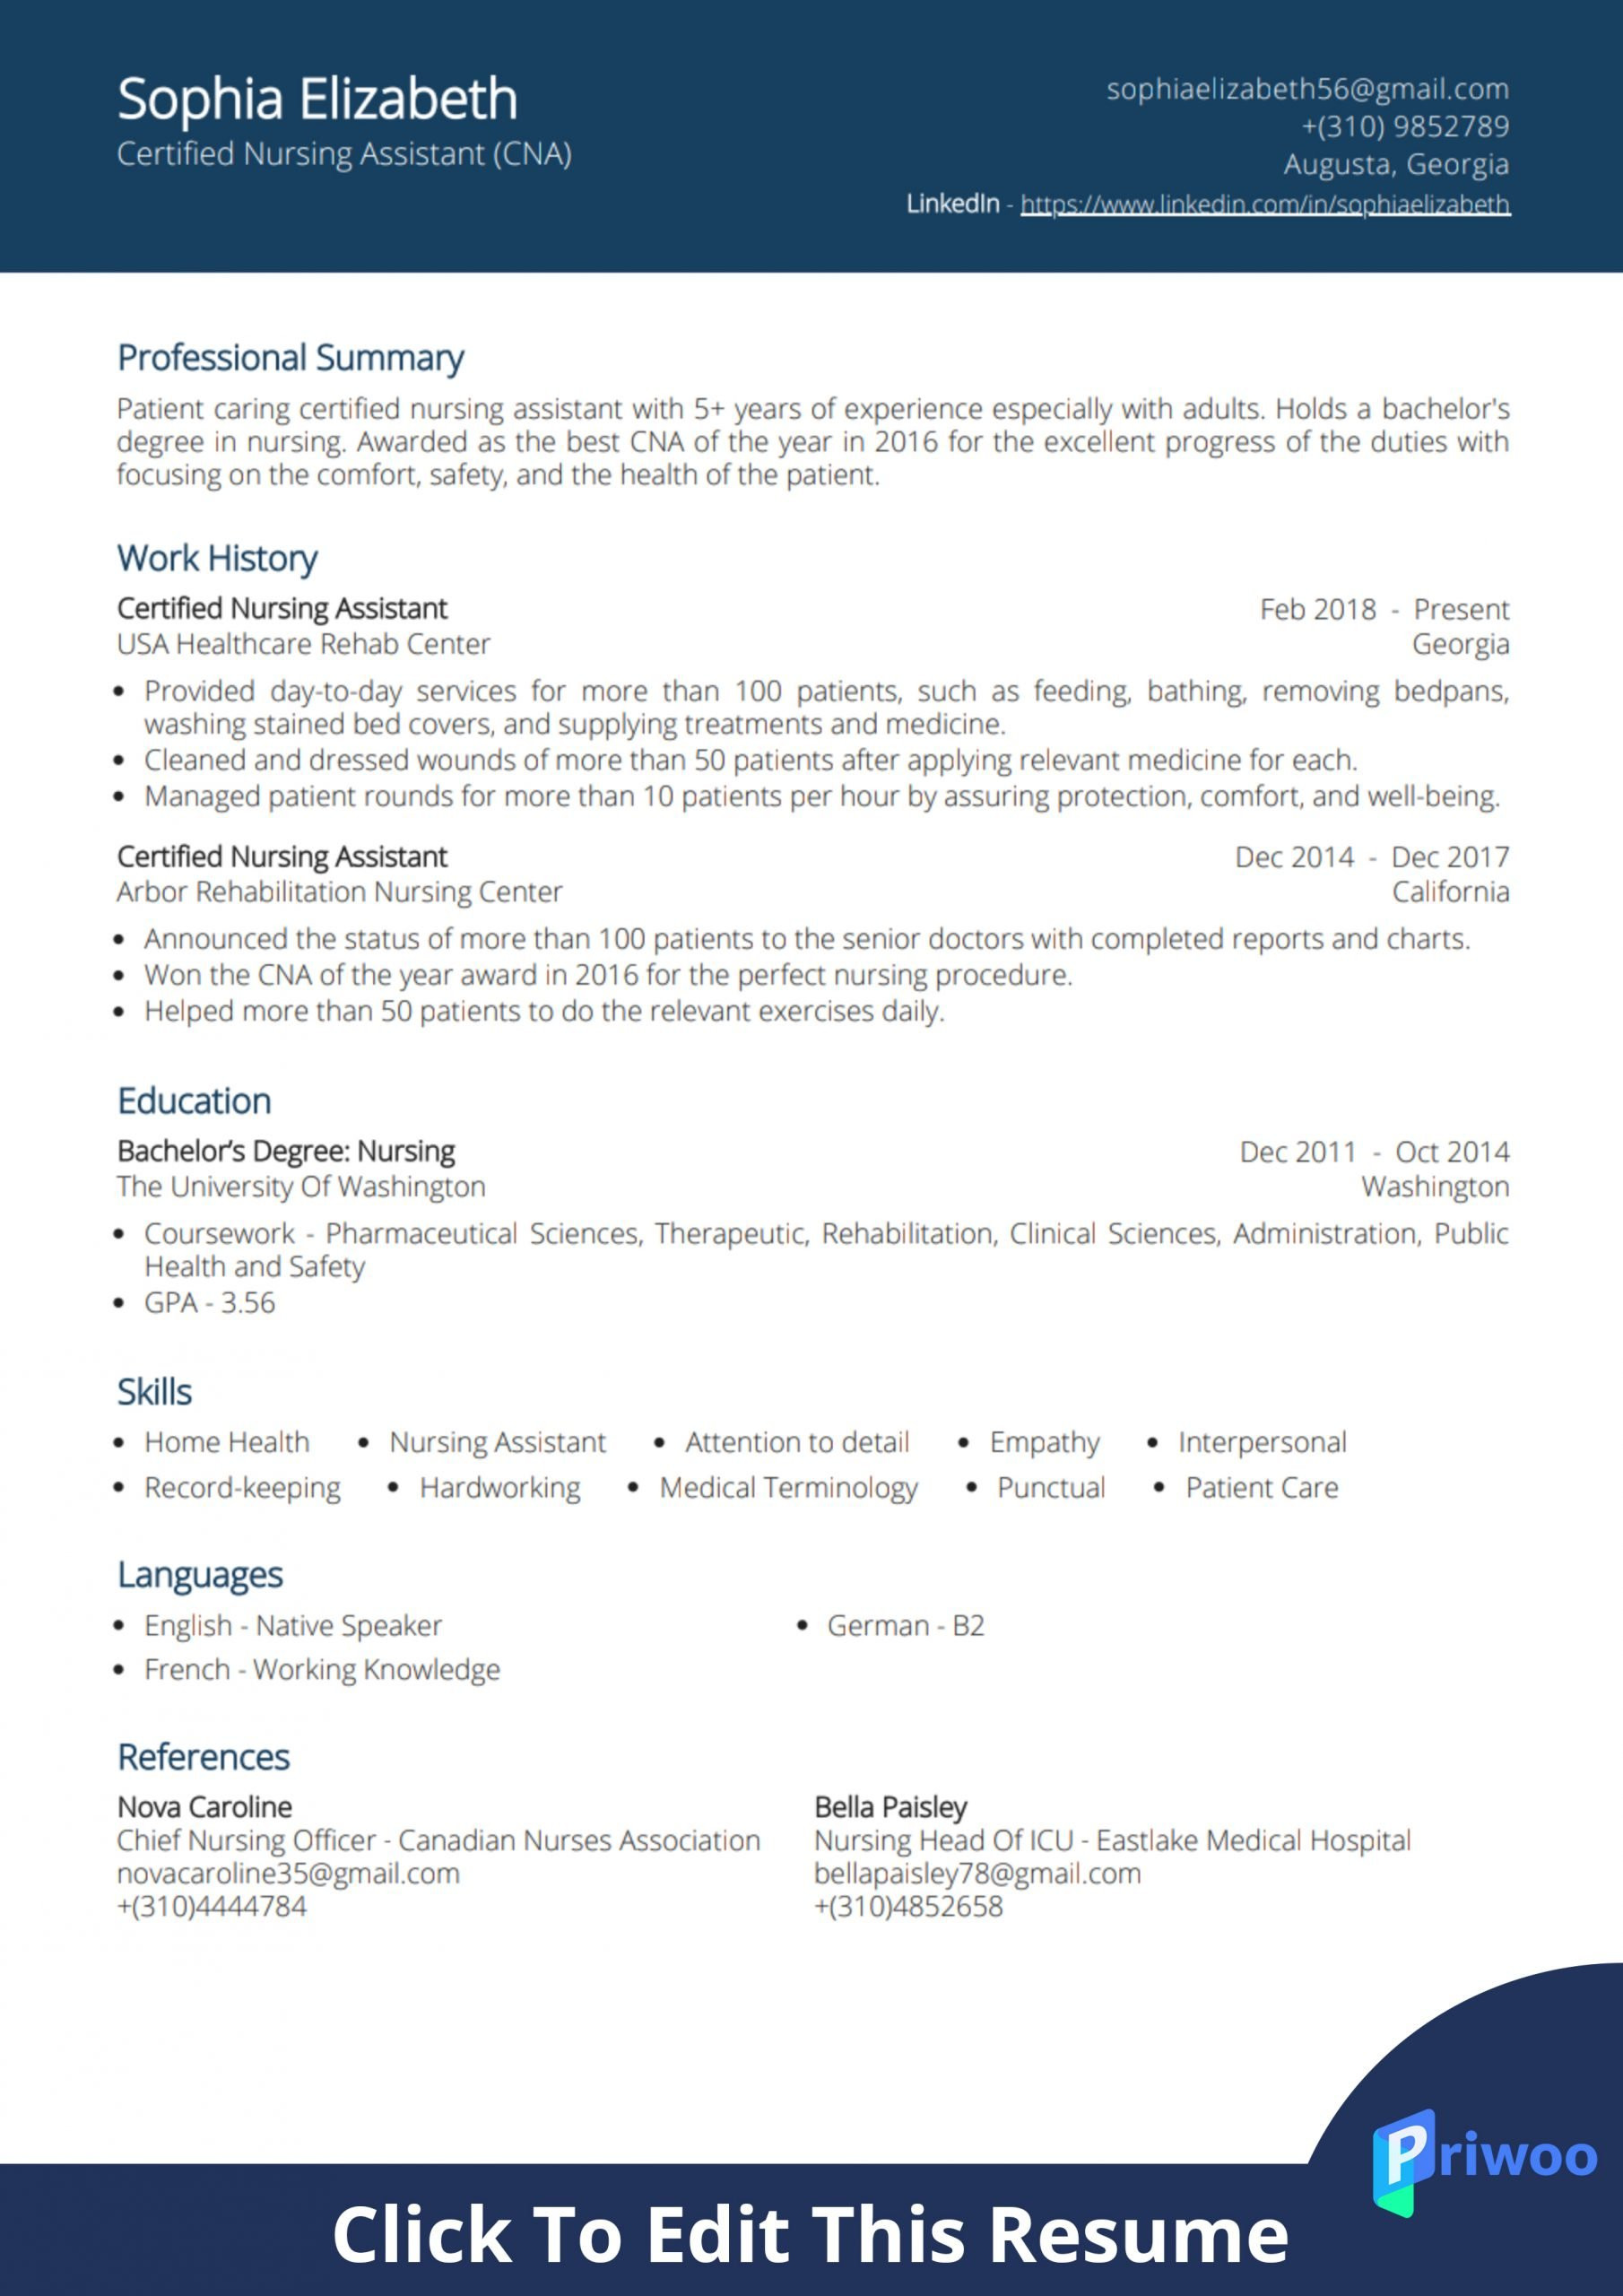 Sample Resume for Cna with Previous Experience Certified Nursing assistant (cna) Resume Example Priwoo